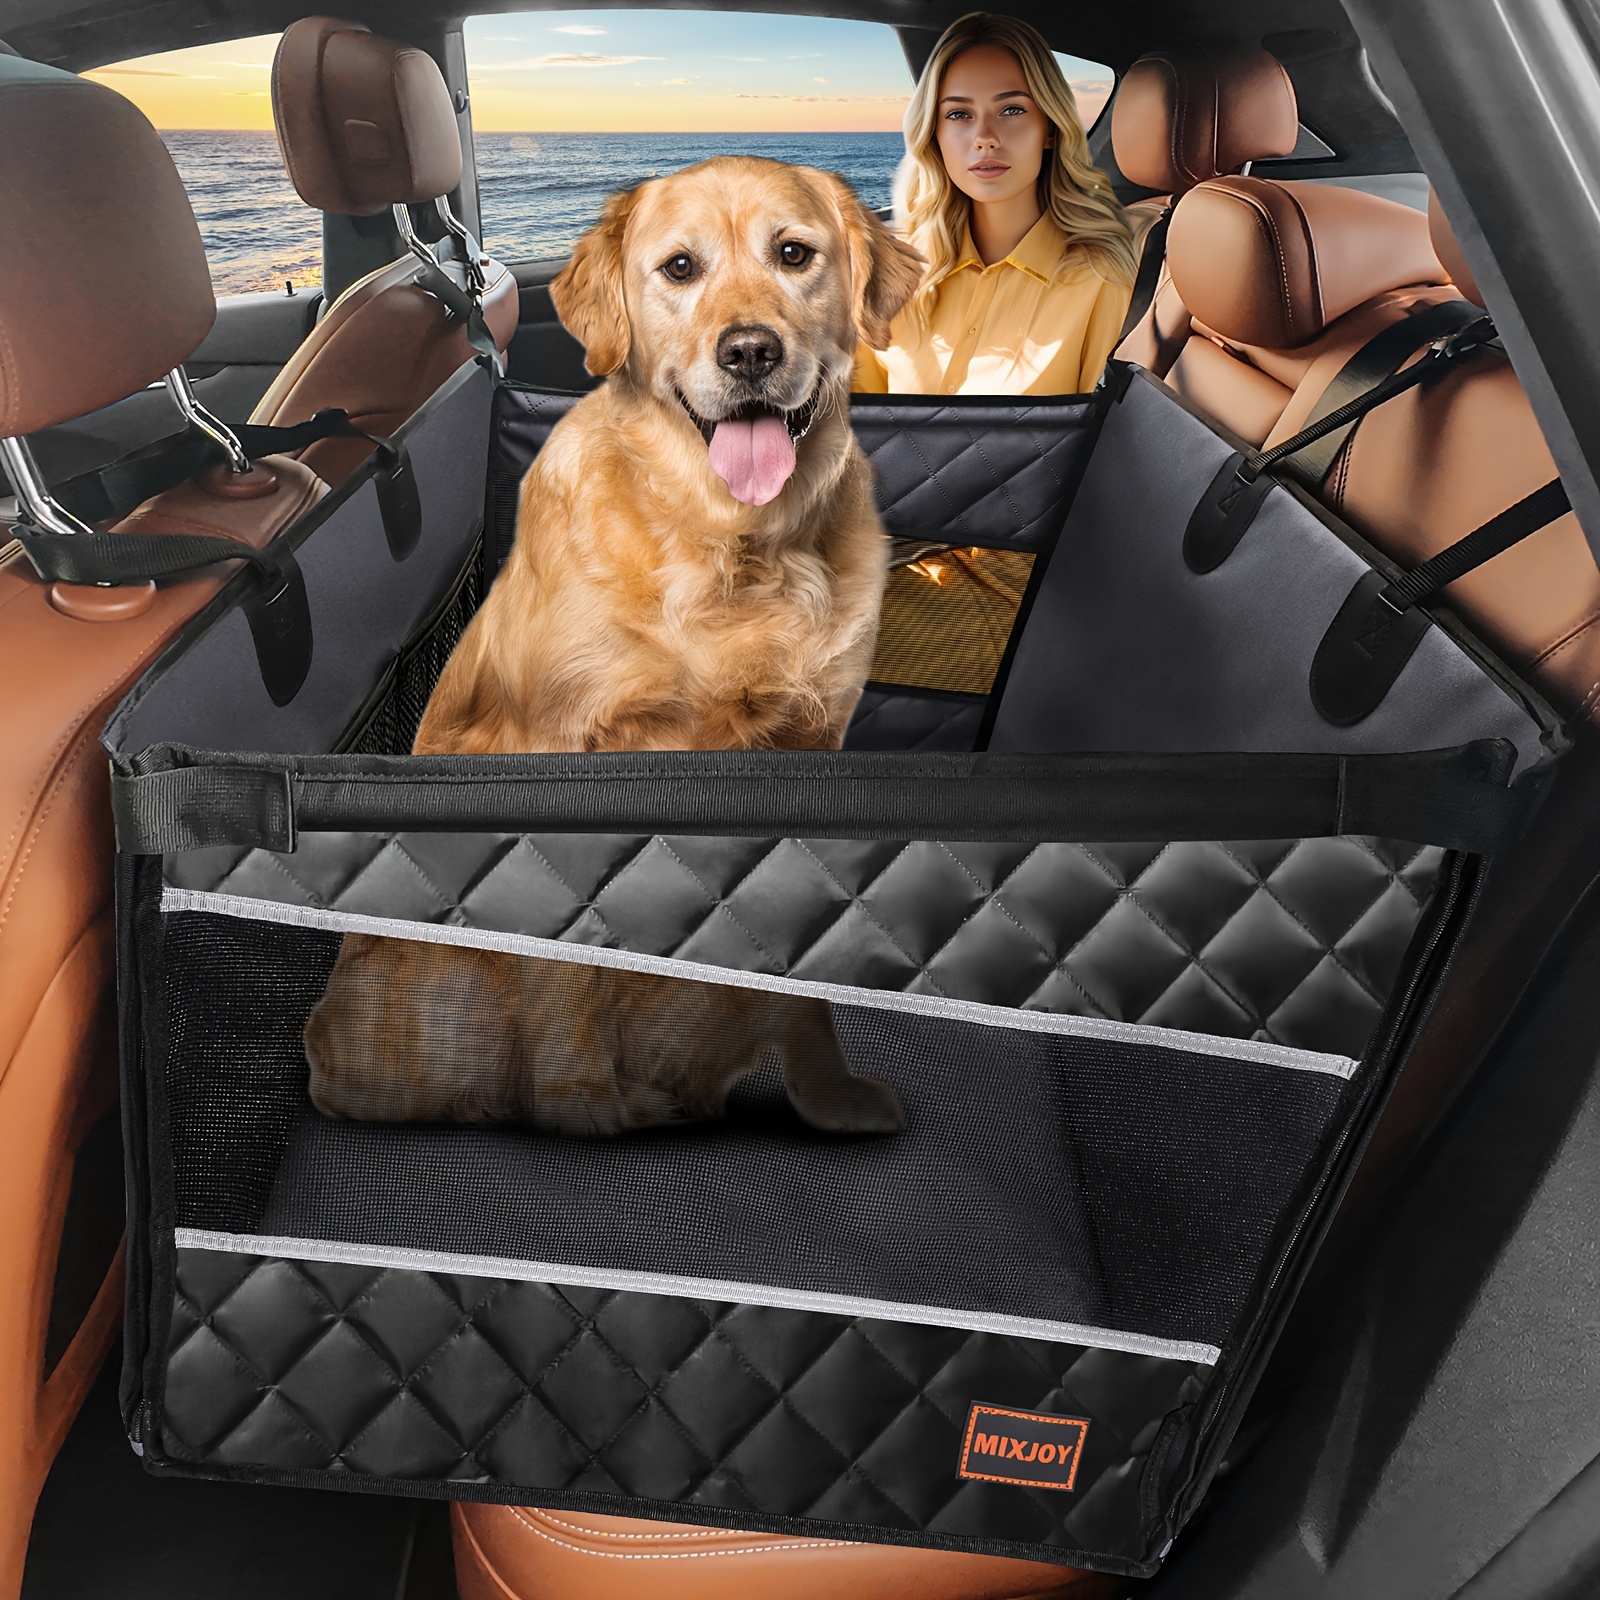 

Dog Car Seat For Large Medium Dogs, Back Seat Extender For Dogs, Waterproof Dog Carseat, Dog Car Seat Medium Sized Dog, Car Hammock For Dogs-storage Pocket, Pet Seat Cover For Cars/suv/truck (l)